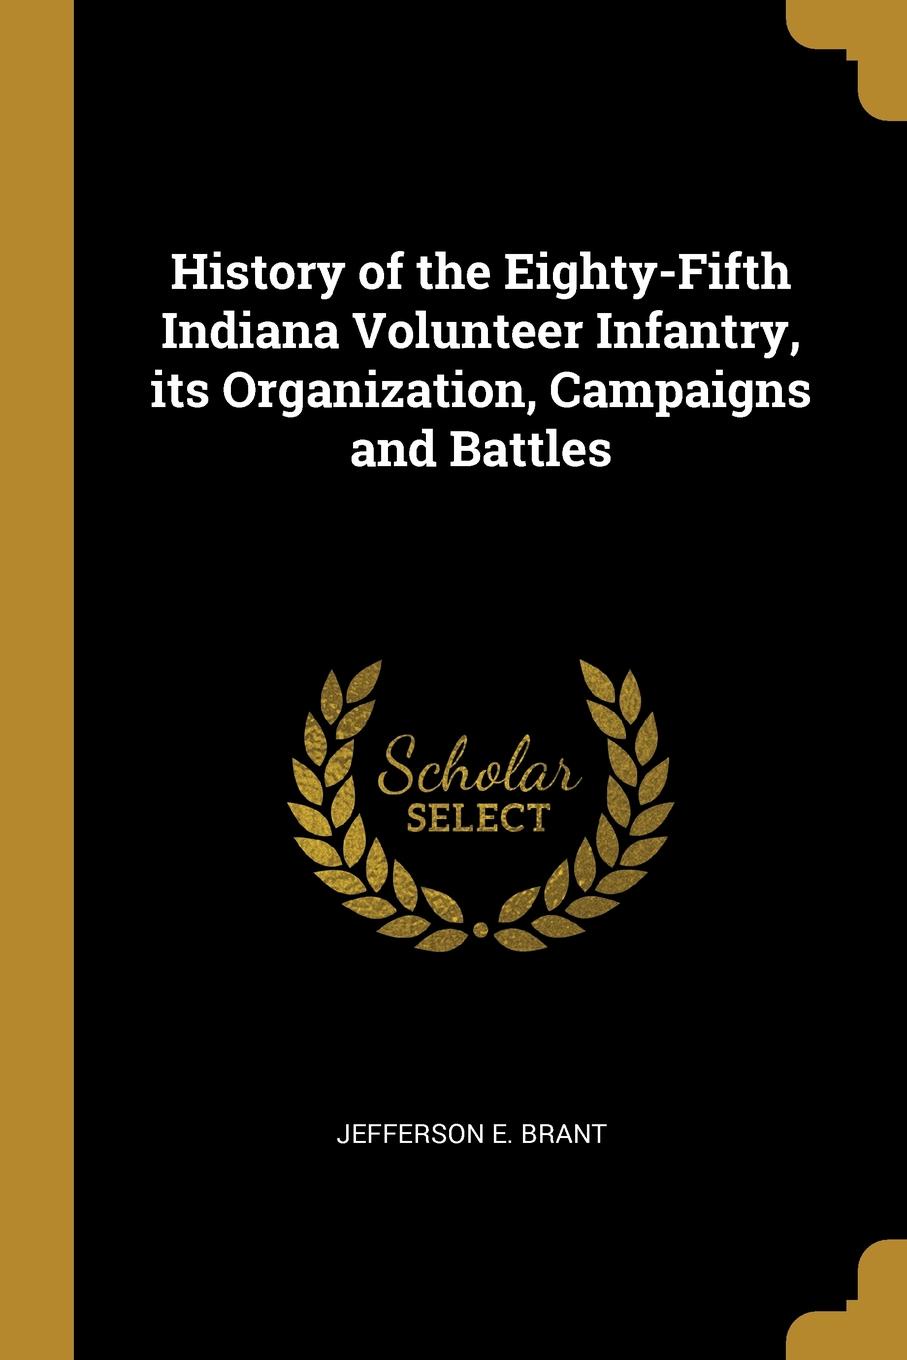 History of the Eighty-Fifth Indiana Volunteer Infantry, its Organization, Campaigns and Battles